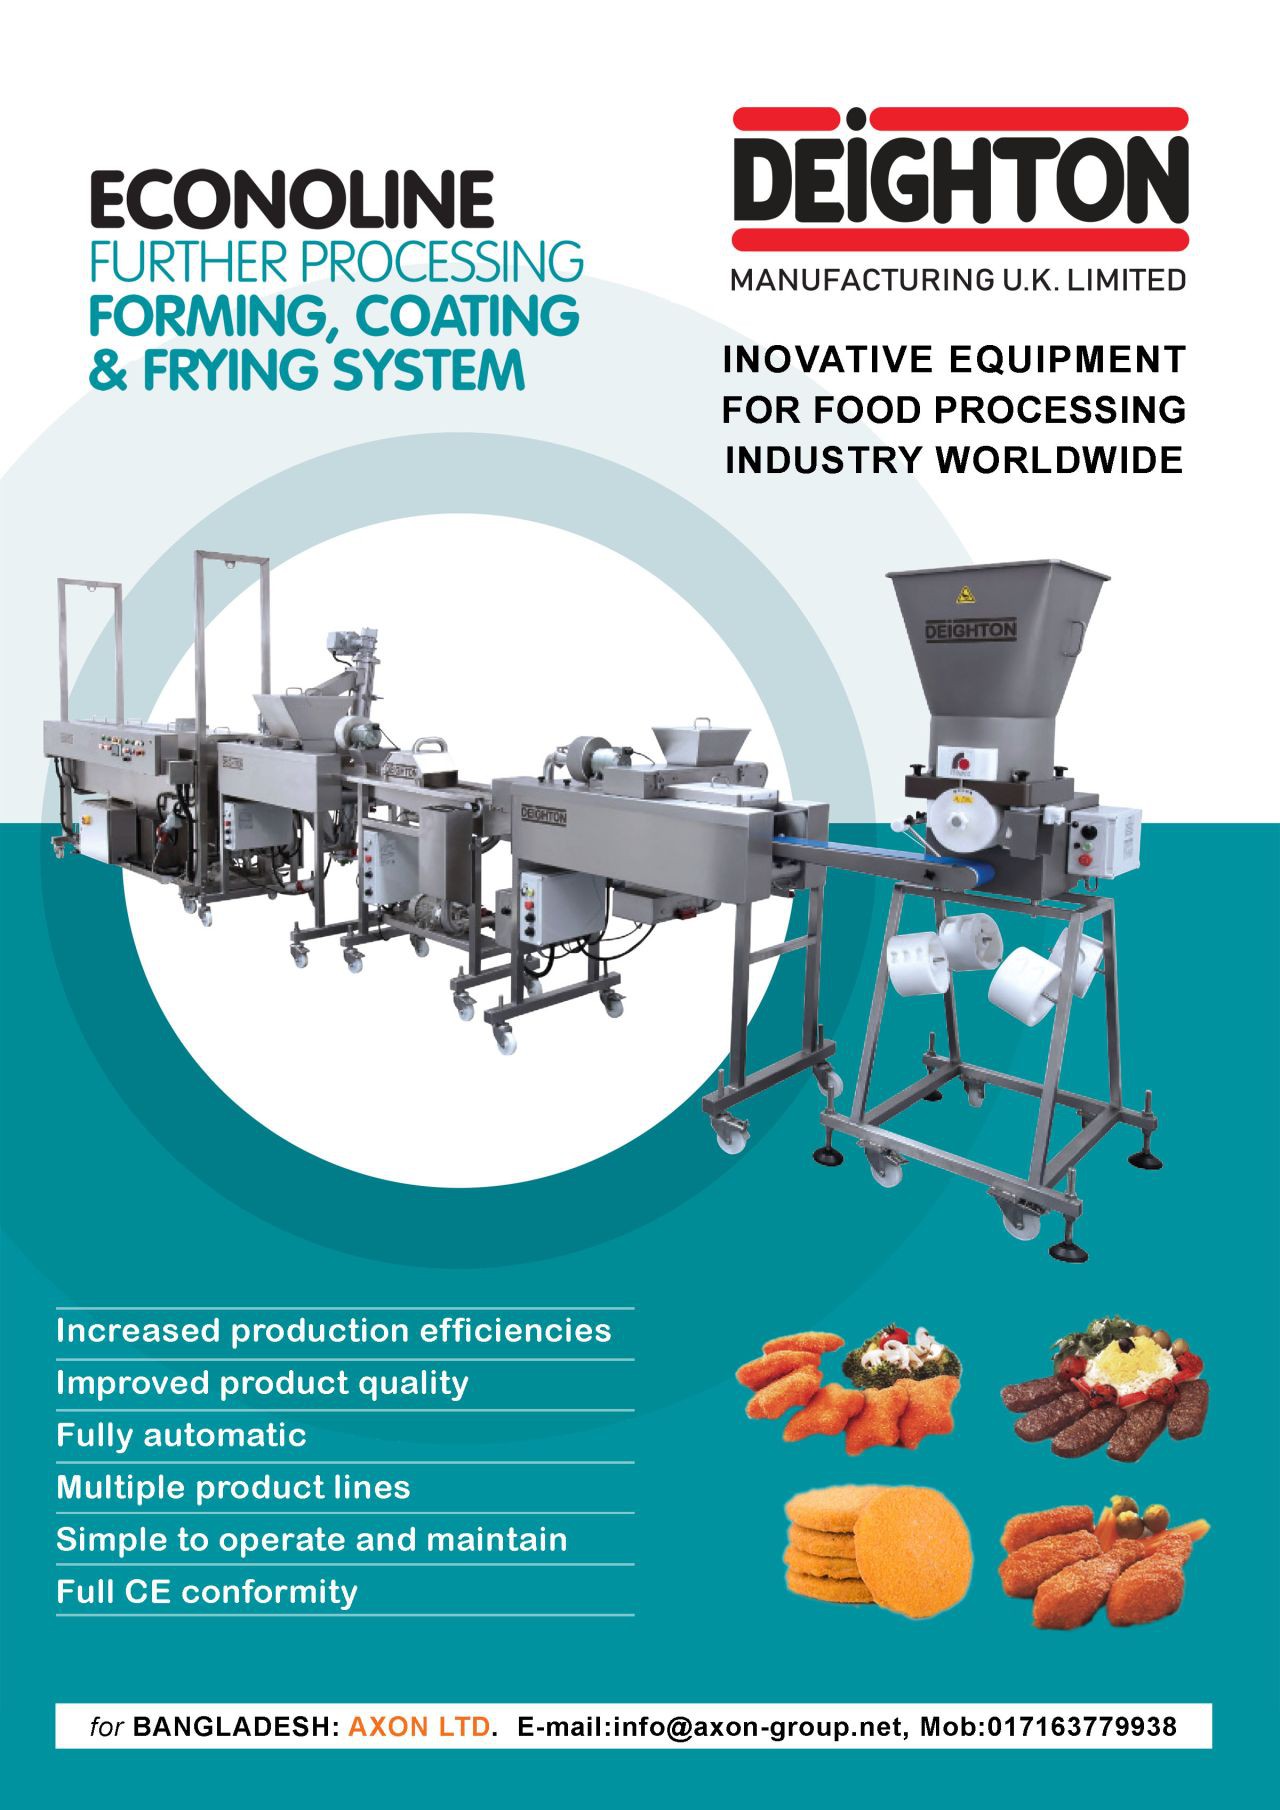 Deighton Manufacturing U.K Equipment significantly plays an important role in the Meat processing Industry of Bangladesh